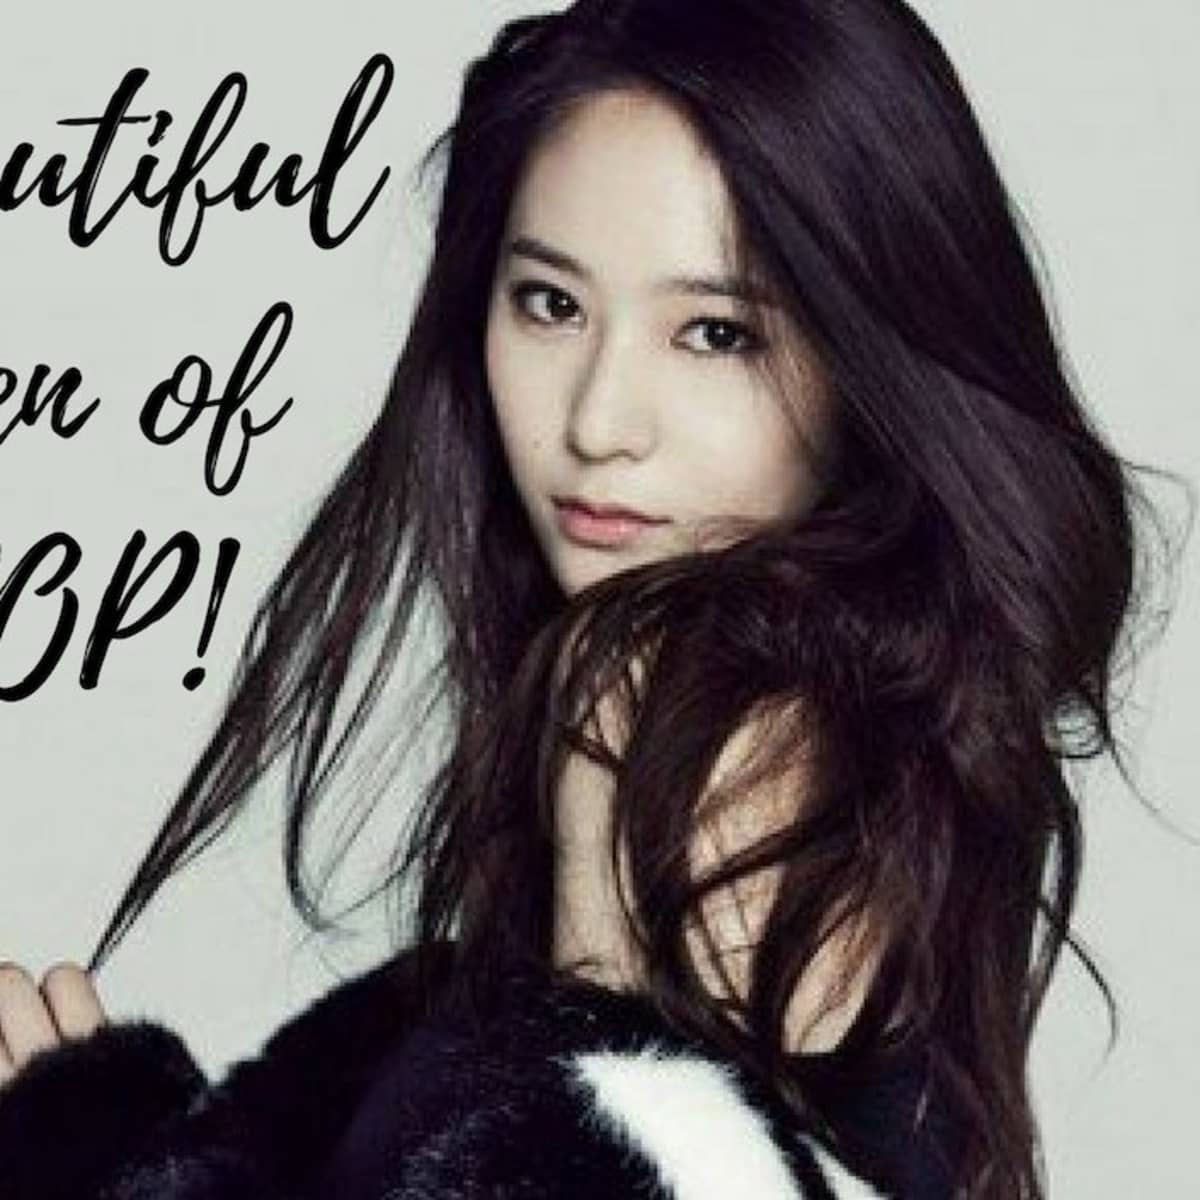 Top 10 Most Beautiful, Cute, And Popular K-Pop Girls - Spinditty